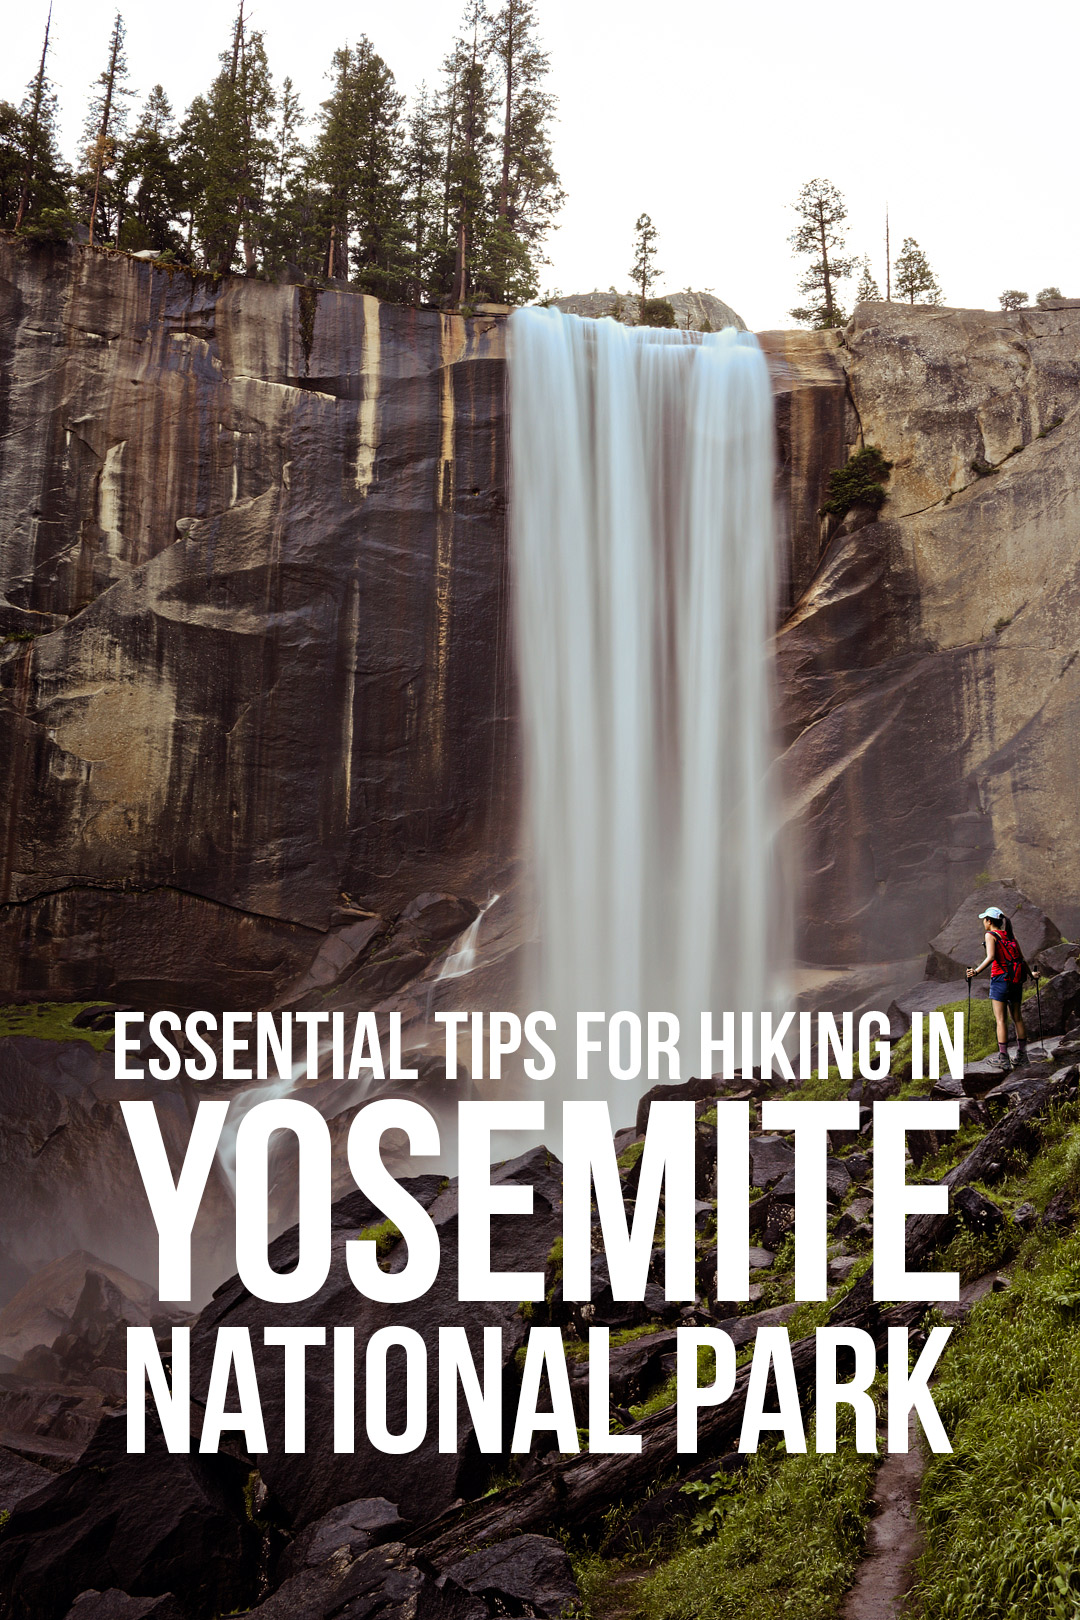 Taking a trip to Yosemite National Park? Save this pin and click to see details on the 11 best hikes in Yosemite National Park you shouldn’t miss. These Yosemite hiking trails are also some of the best hikes in California and the US that you’ll want to add to your hiking bucket lists. They take you to the park’s most beautiful places and scenic views. // Local Adventurer #localadventurer #yosemite #california #nationalpark #visitcalifornia #visitca #findyourpark